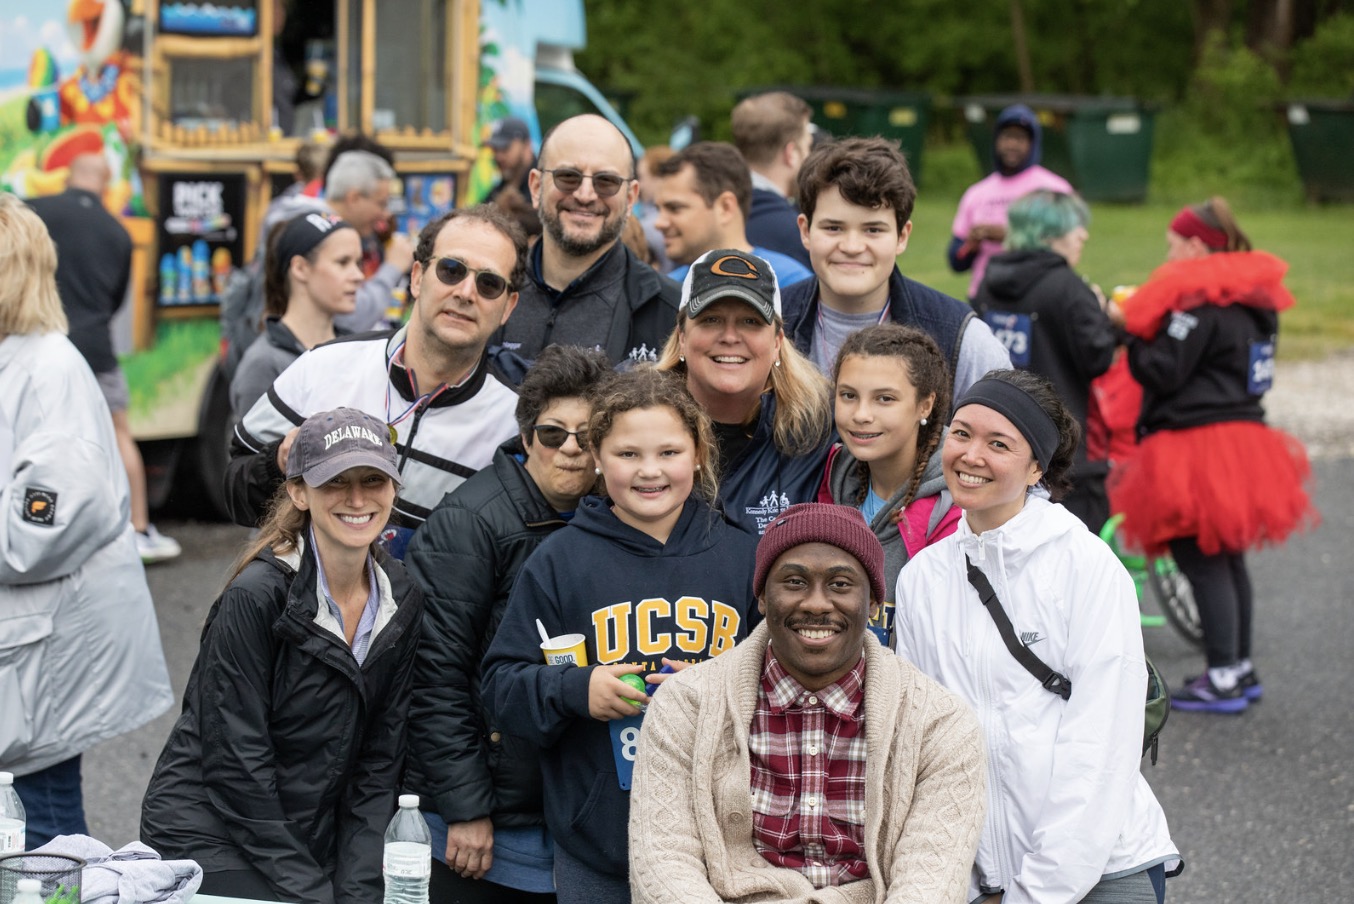 MCDD staff members, members of the community and Kennedy Krieger Institute president and CEO Dr. Bradley Schlaggar pose for a group photo at ROAR.